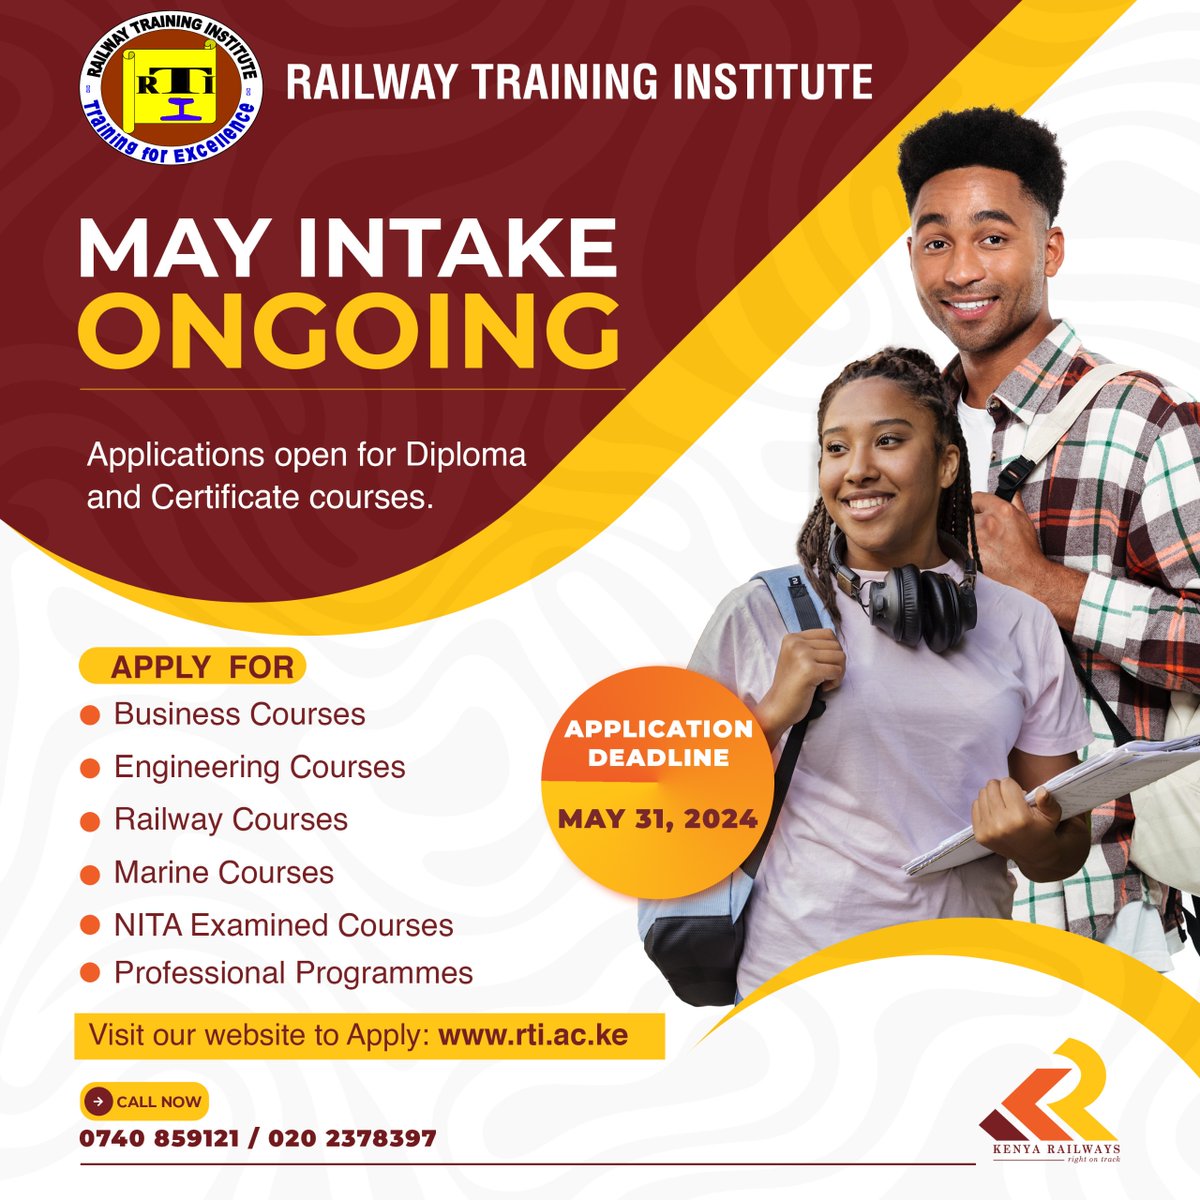 Pursue higher education in Railway Training Institute Main Campus in South B, Nairobi City offering an array of rail and non-rail courses. Apply for May 2024 intake on rti.ac.ke #RailwayTrainingInstitute #SongaNasi